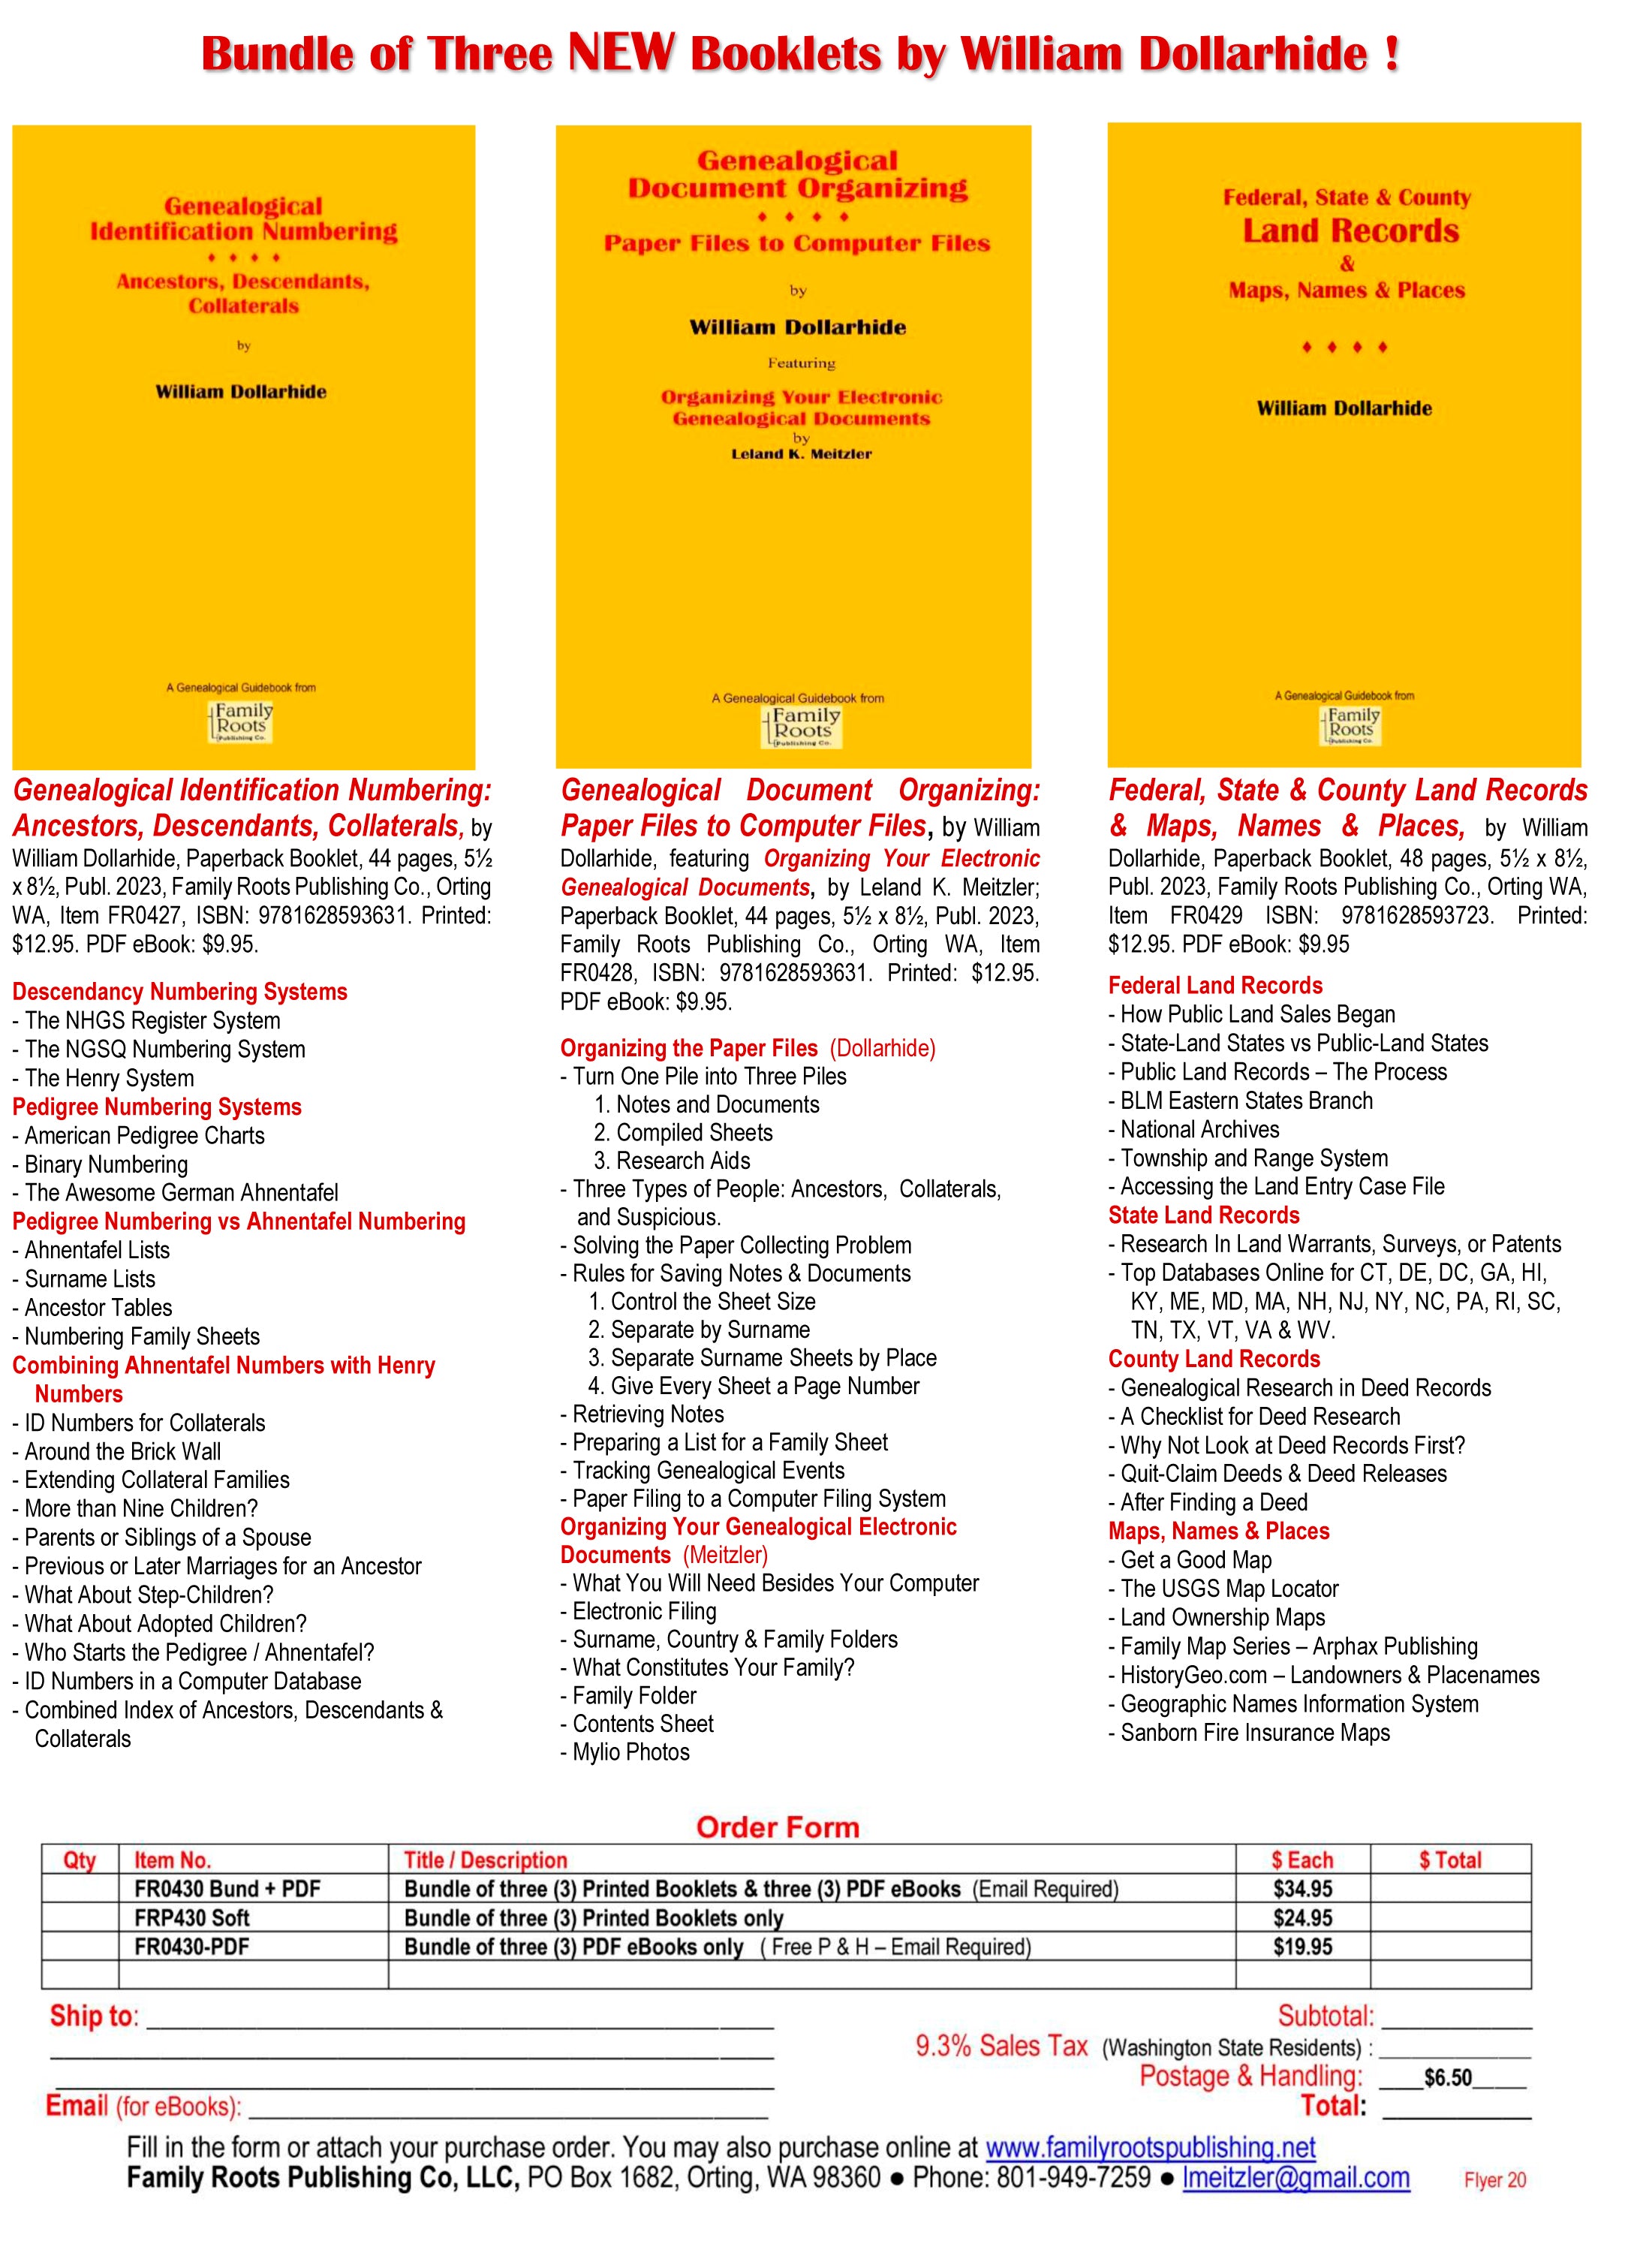 FREE Flyer:  Downloadable PDF Flyer - 3 New Booklets From William Dollarhide